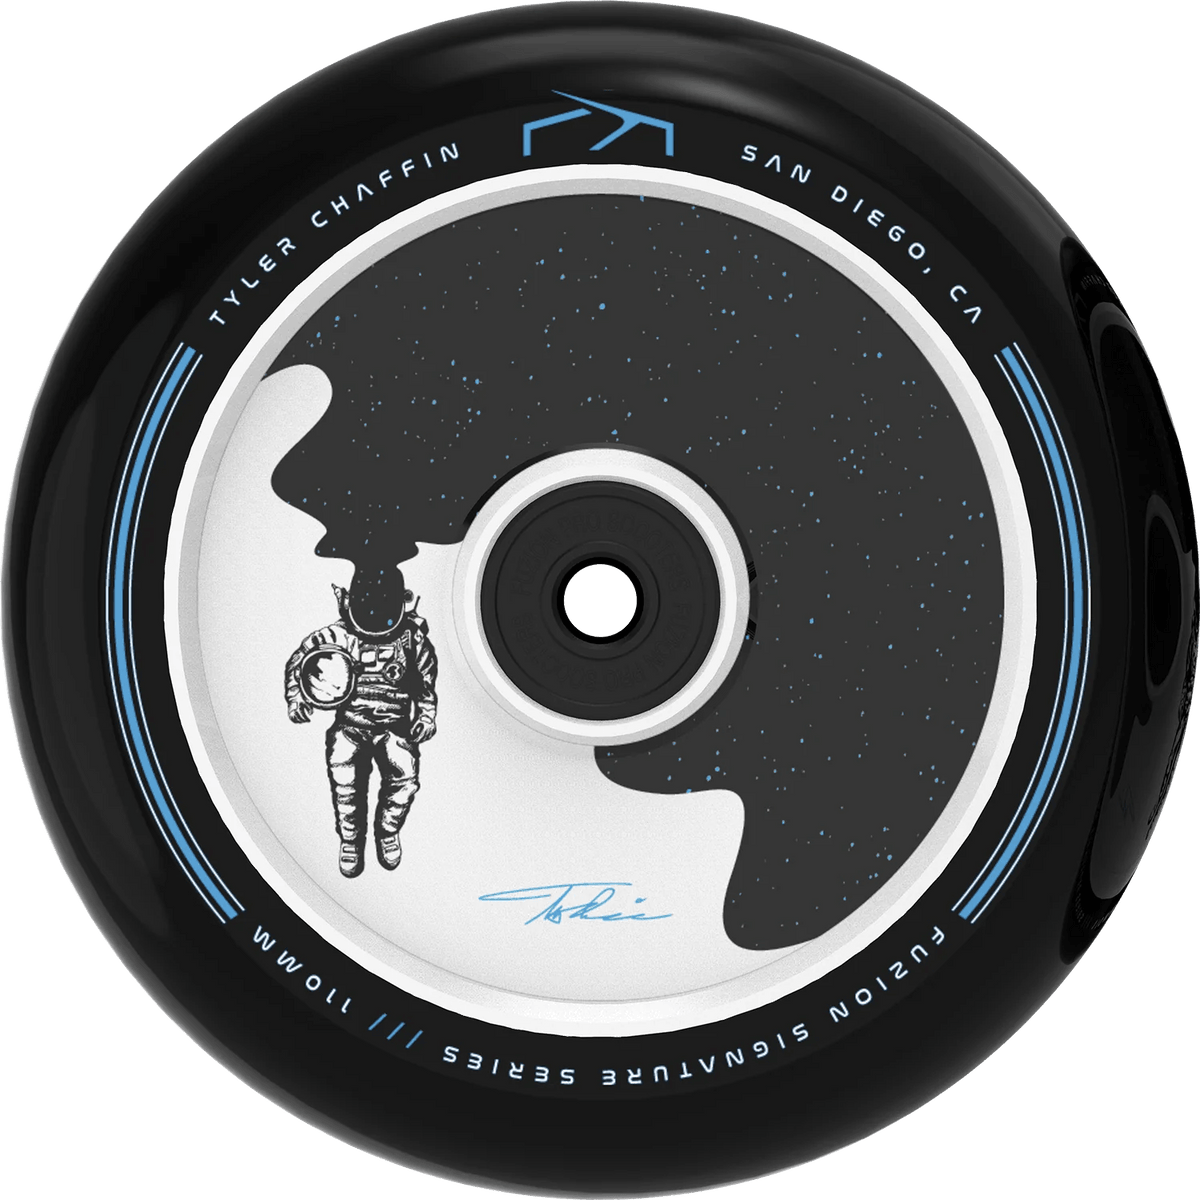 Fuzion Tyler Chaffin Signature V2 Wheels - Riding Scooters - Bland Pro Shop